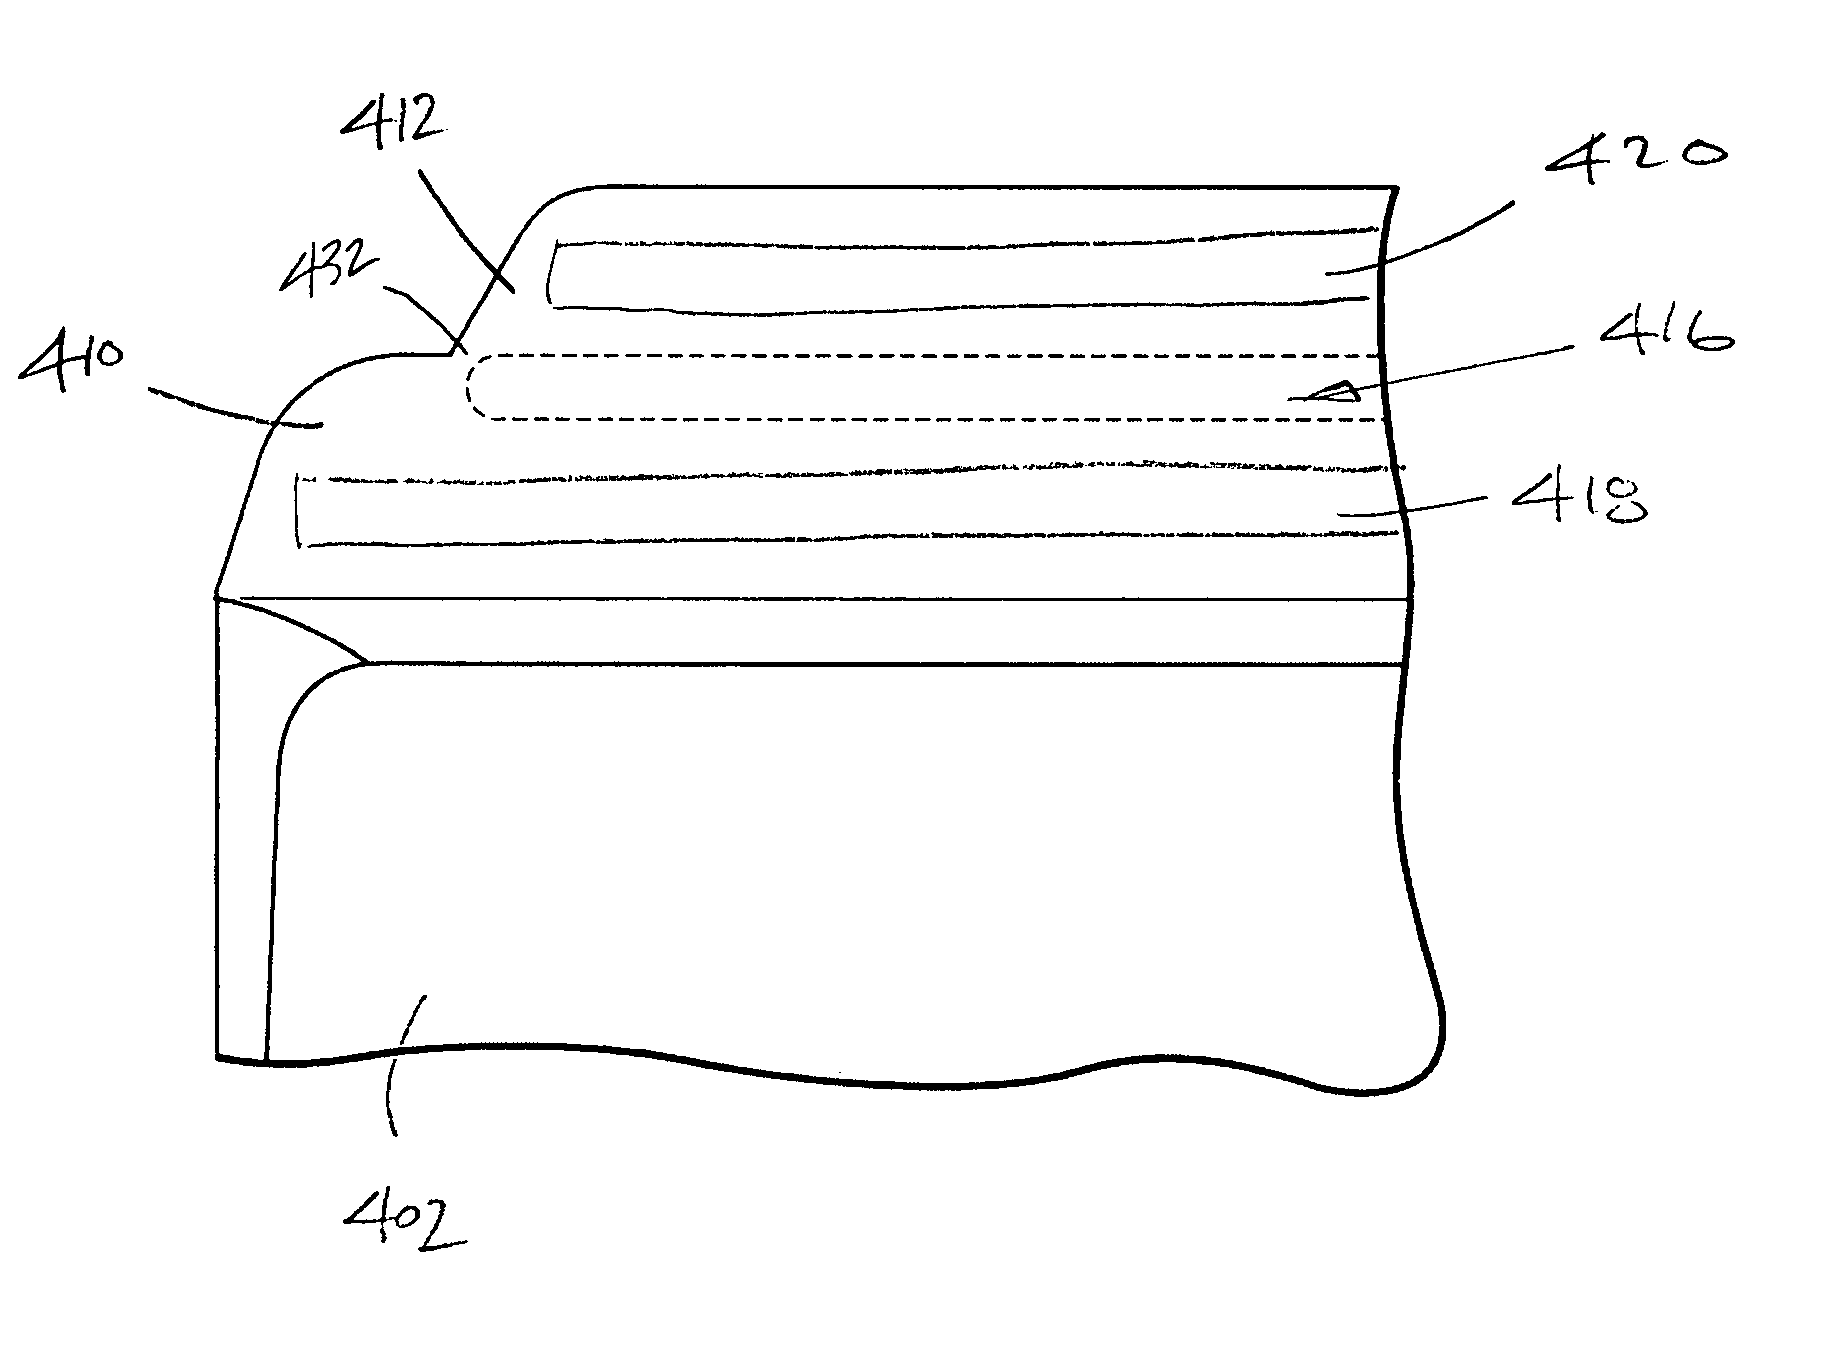 Reusable envelope structures and methods